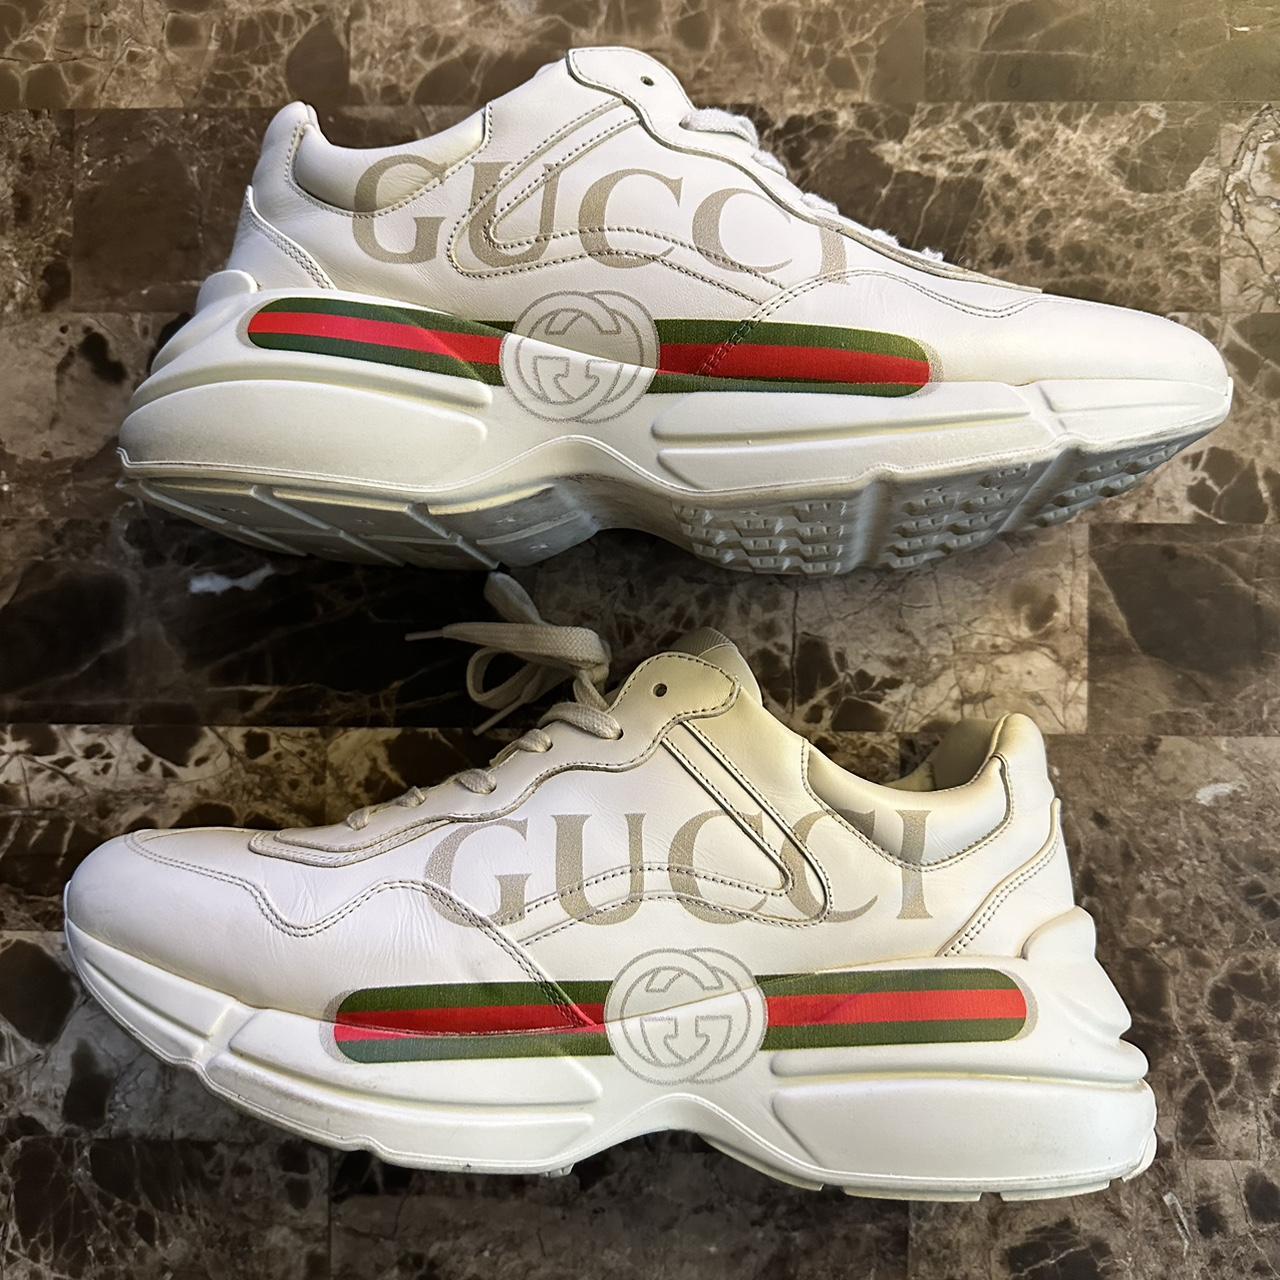 MENS GUCCI RHYTON SNEAKERS COMES WITH DUST BAG &... - Depop